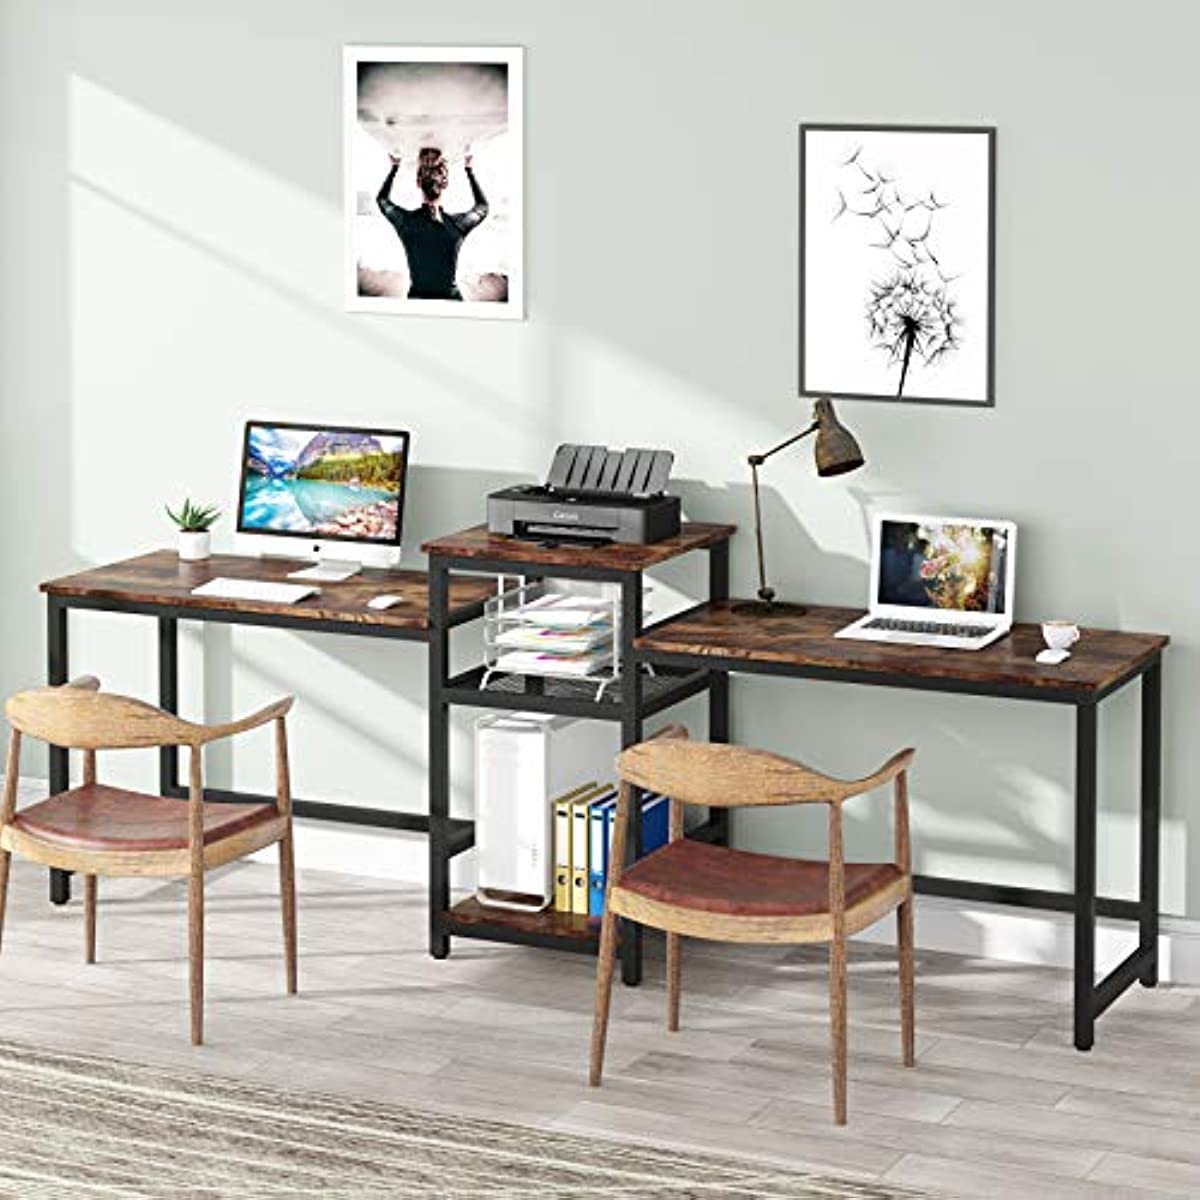 Extra Long Two-Person Desk Workstation with Storage Shelves